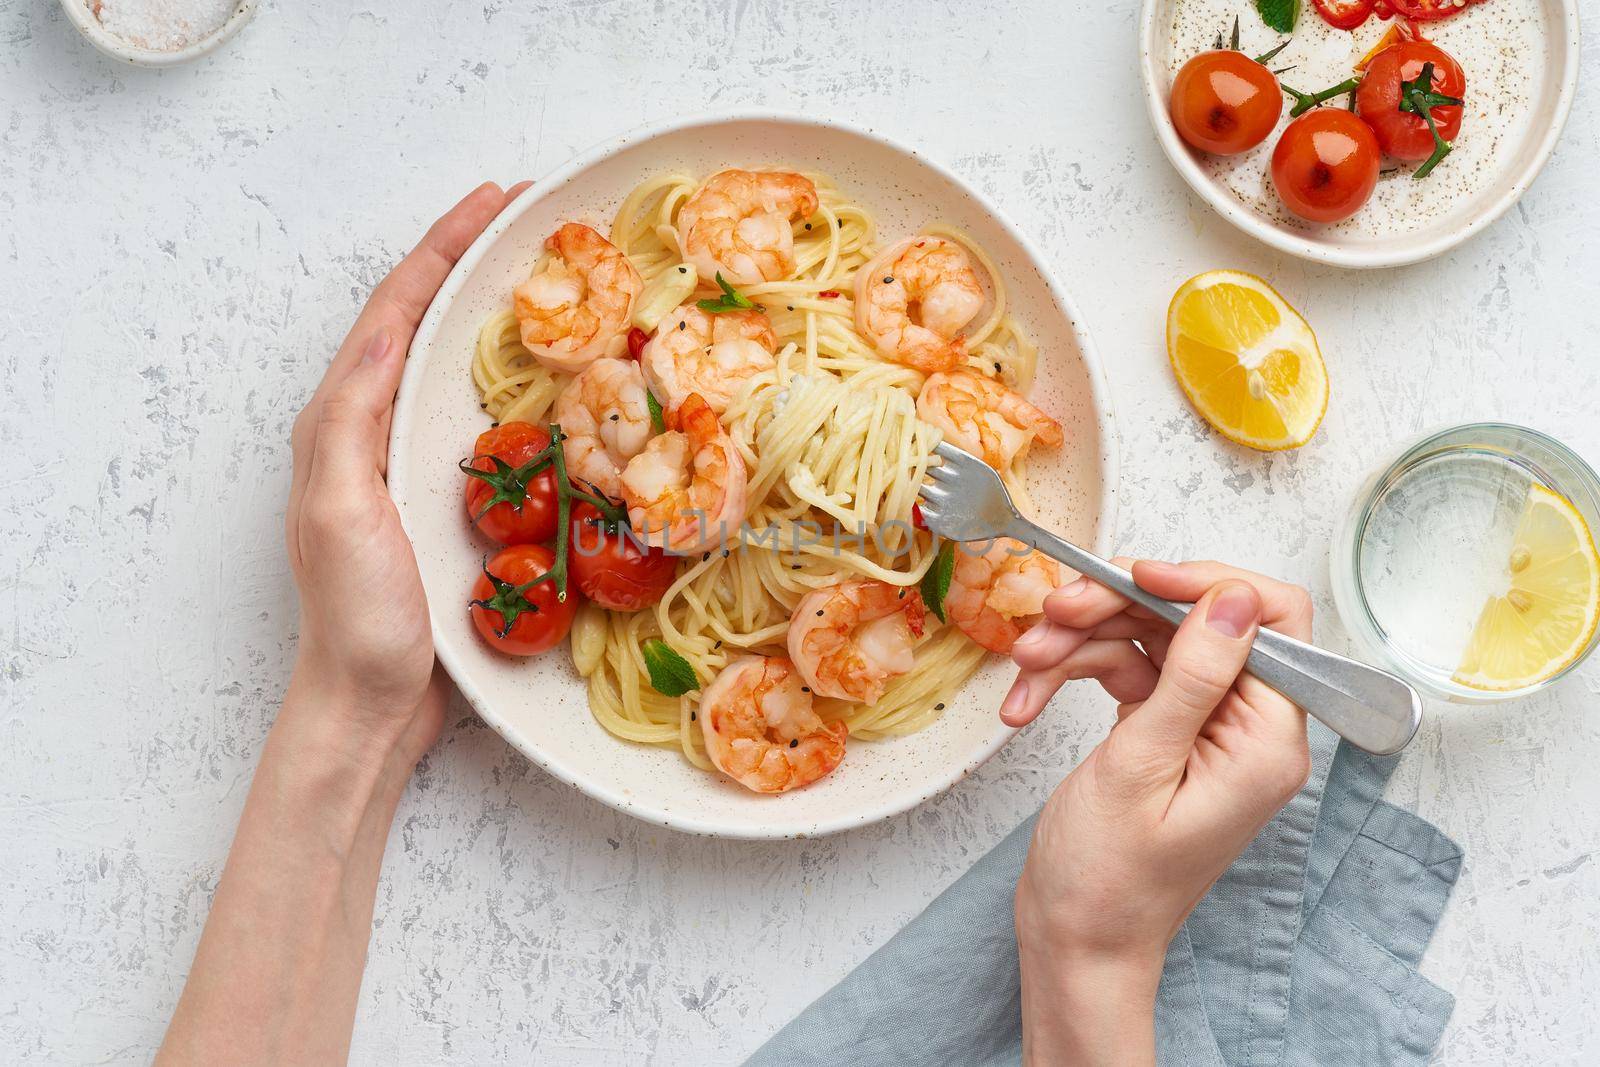 Pasta bavette with fried shrimps, bechamel sauce. Woman hands in frame, girl eats pasta, top view by NataBene